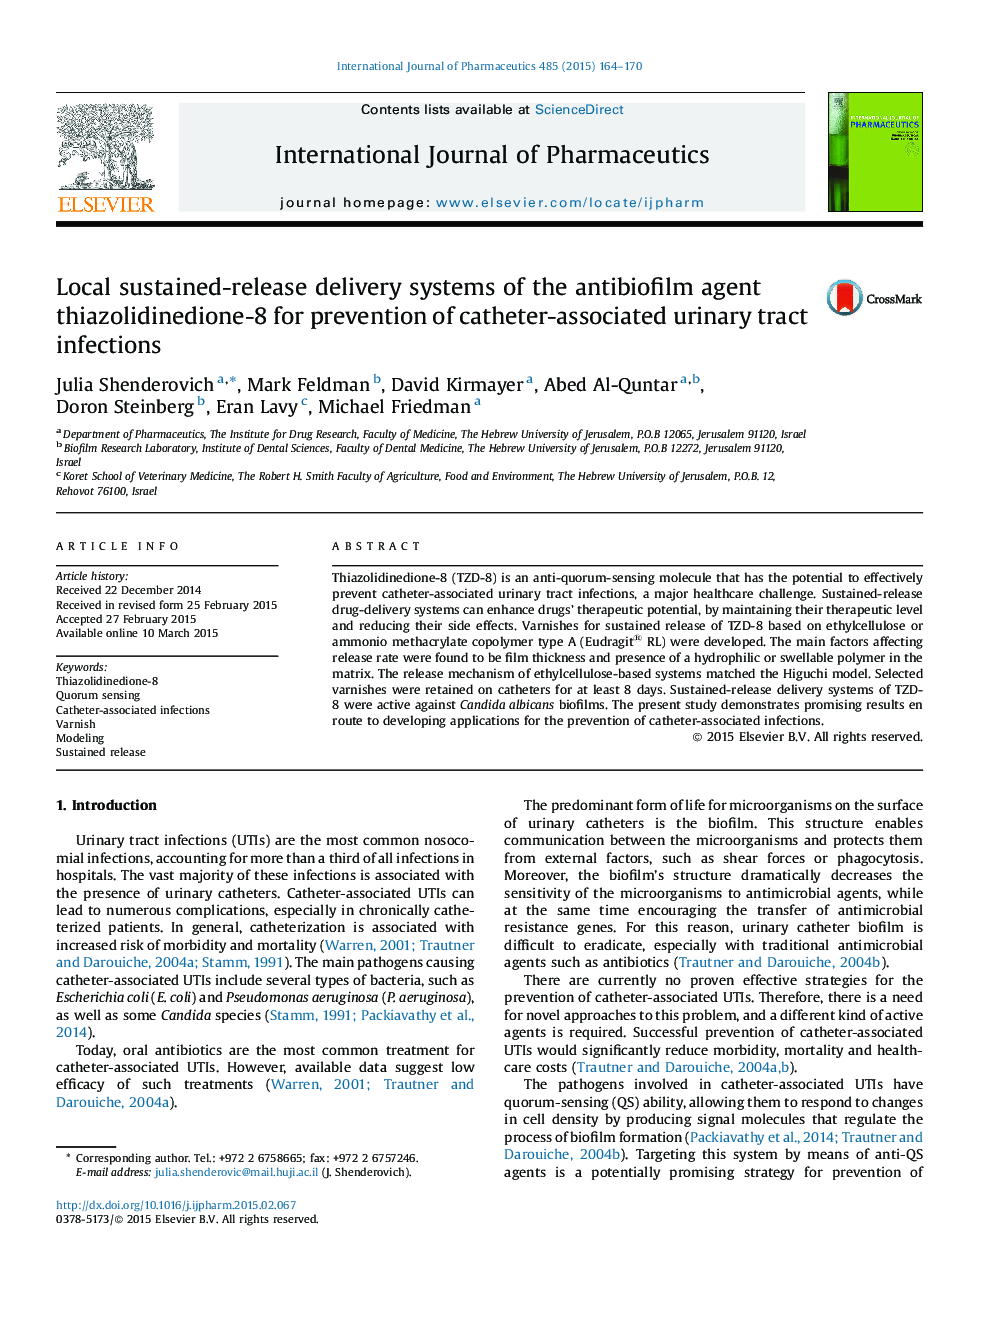 Local sustained-release delivery systems of the antibiofilm agent thiazolidinedione-8 for prevention of catheter-associated urinary tract infections